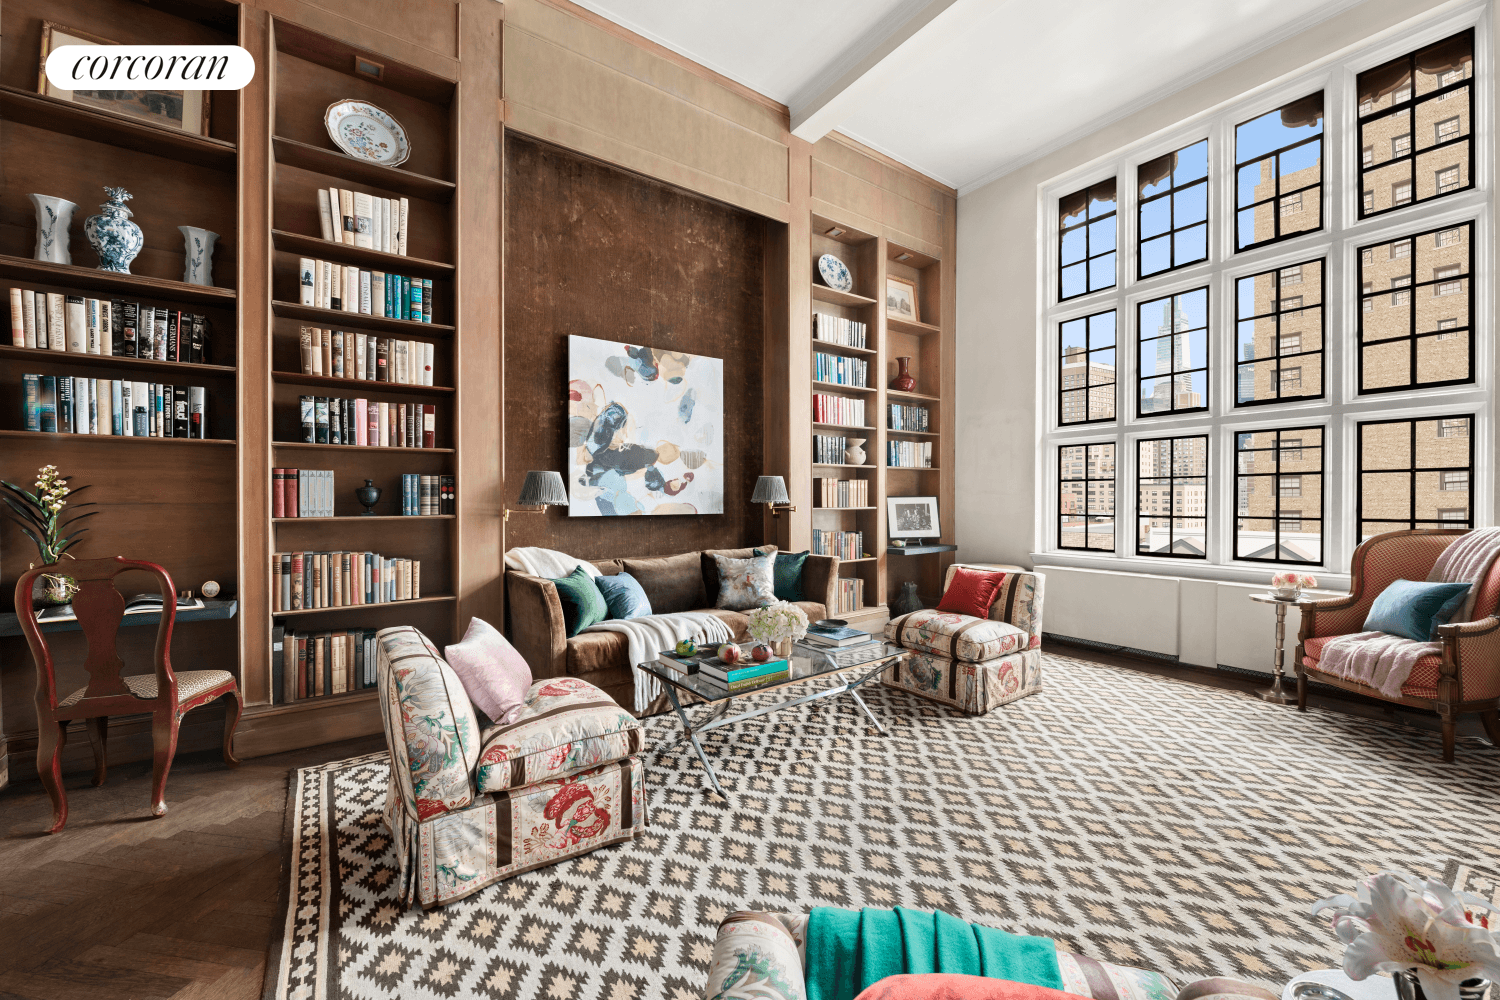 Welcome to one of the most magnificent one bedroom prewar apartments in New York at prestigious 14 East 75th Street, a most highly sought after white glove cooperative in the ...